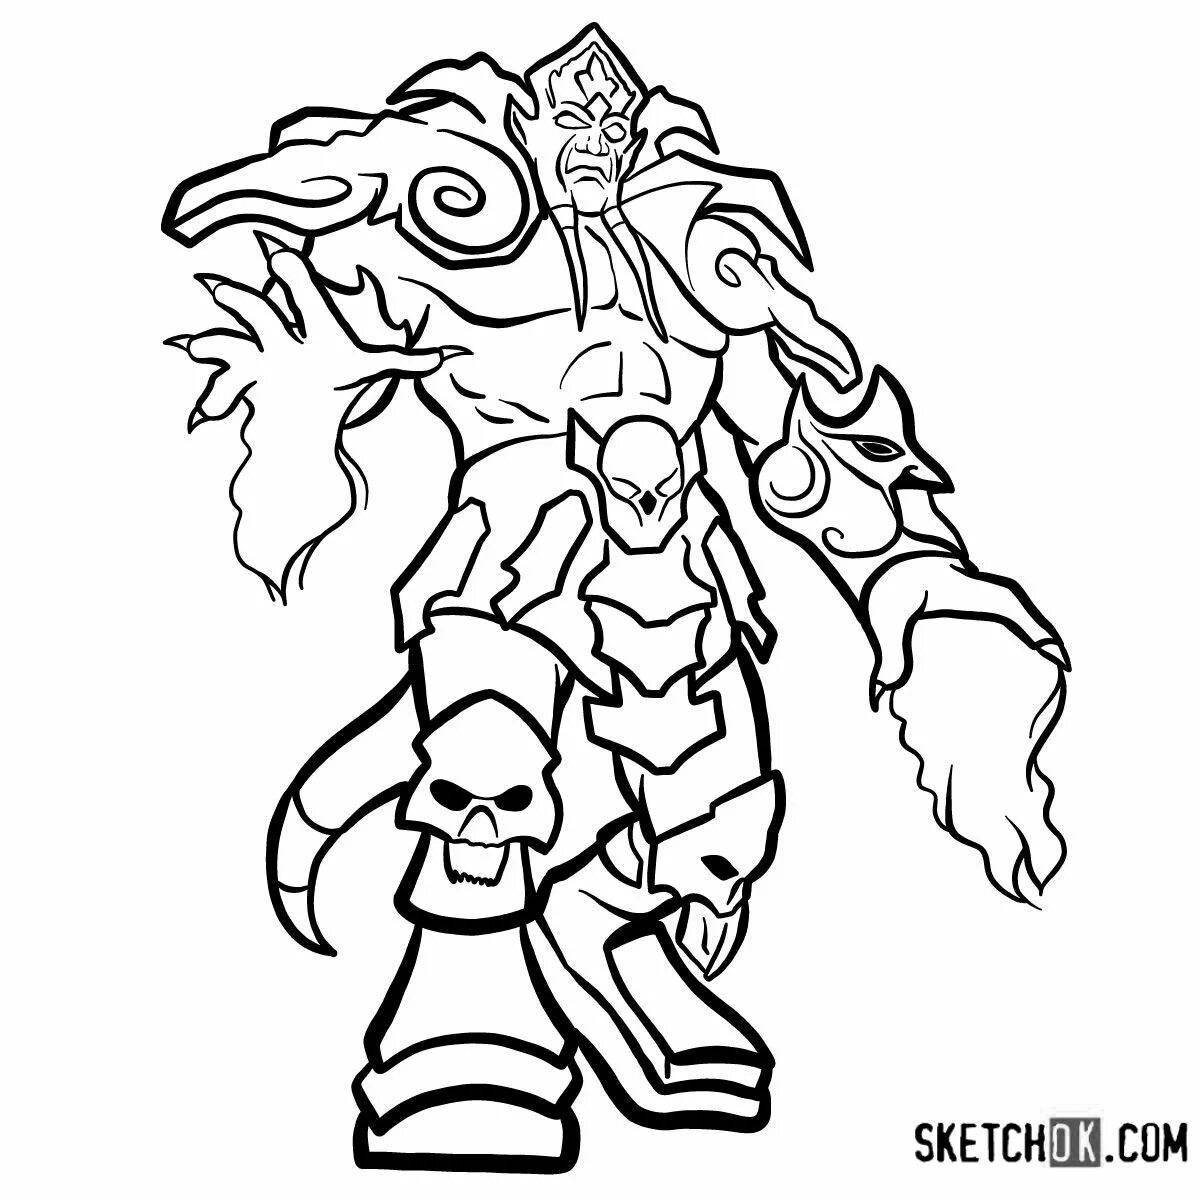 Awesome warcraft 3 coloring book